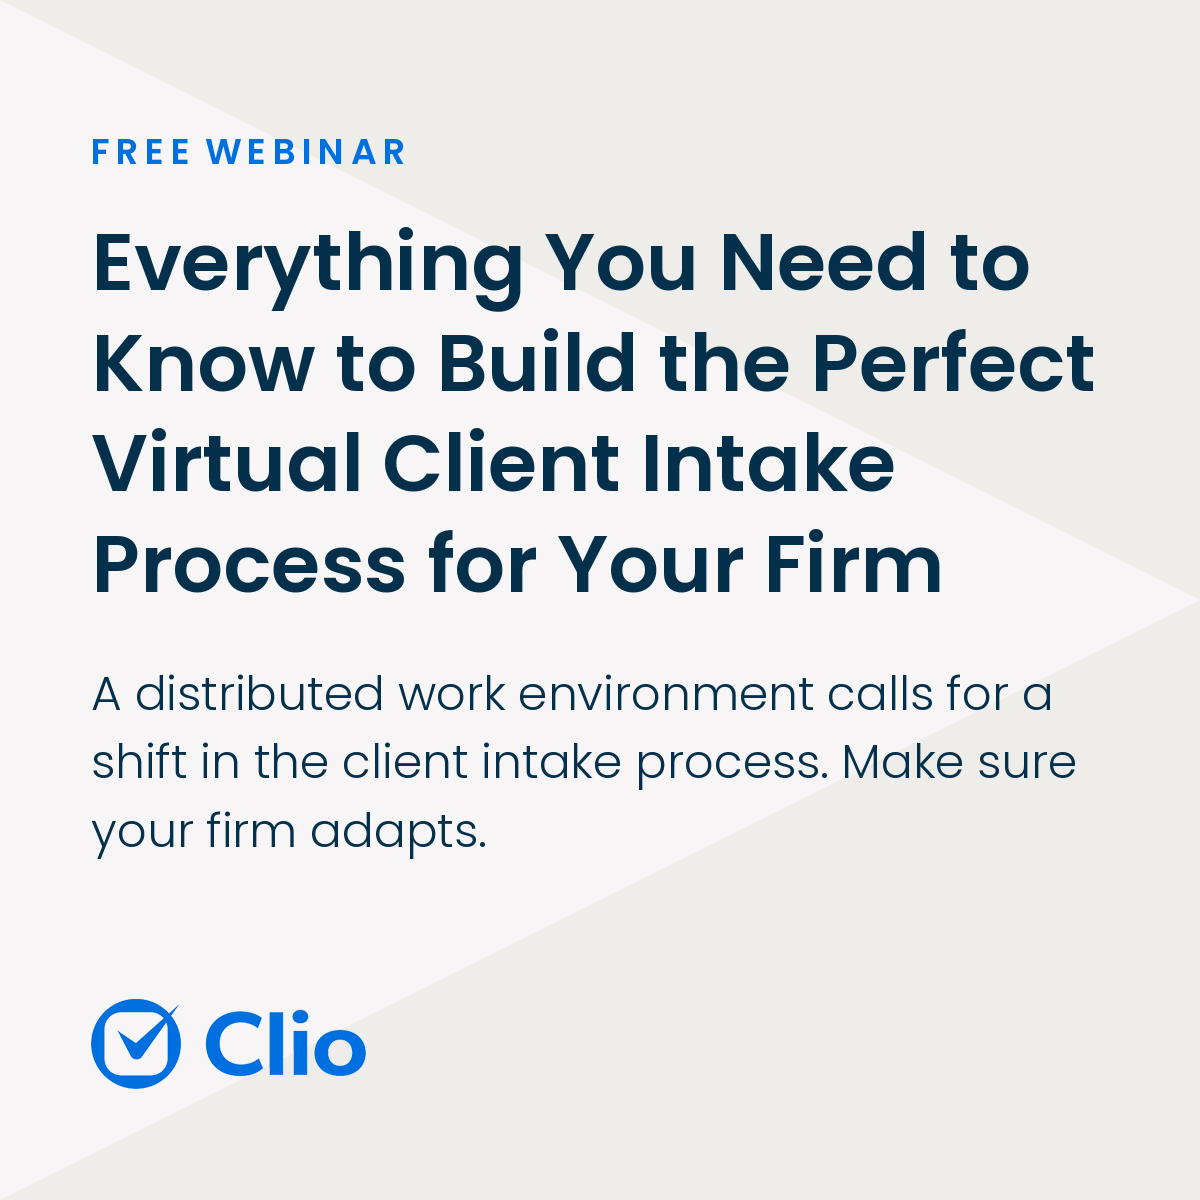 Everything You Need to Know to Build the Perfect Virtual Client Intake Process for Your Firm